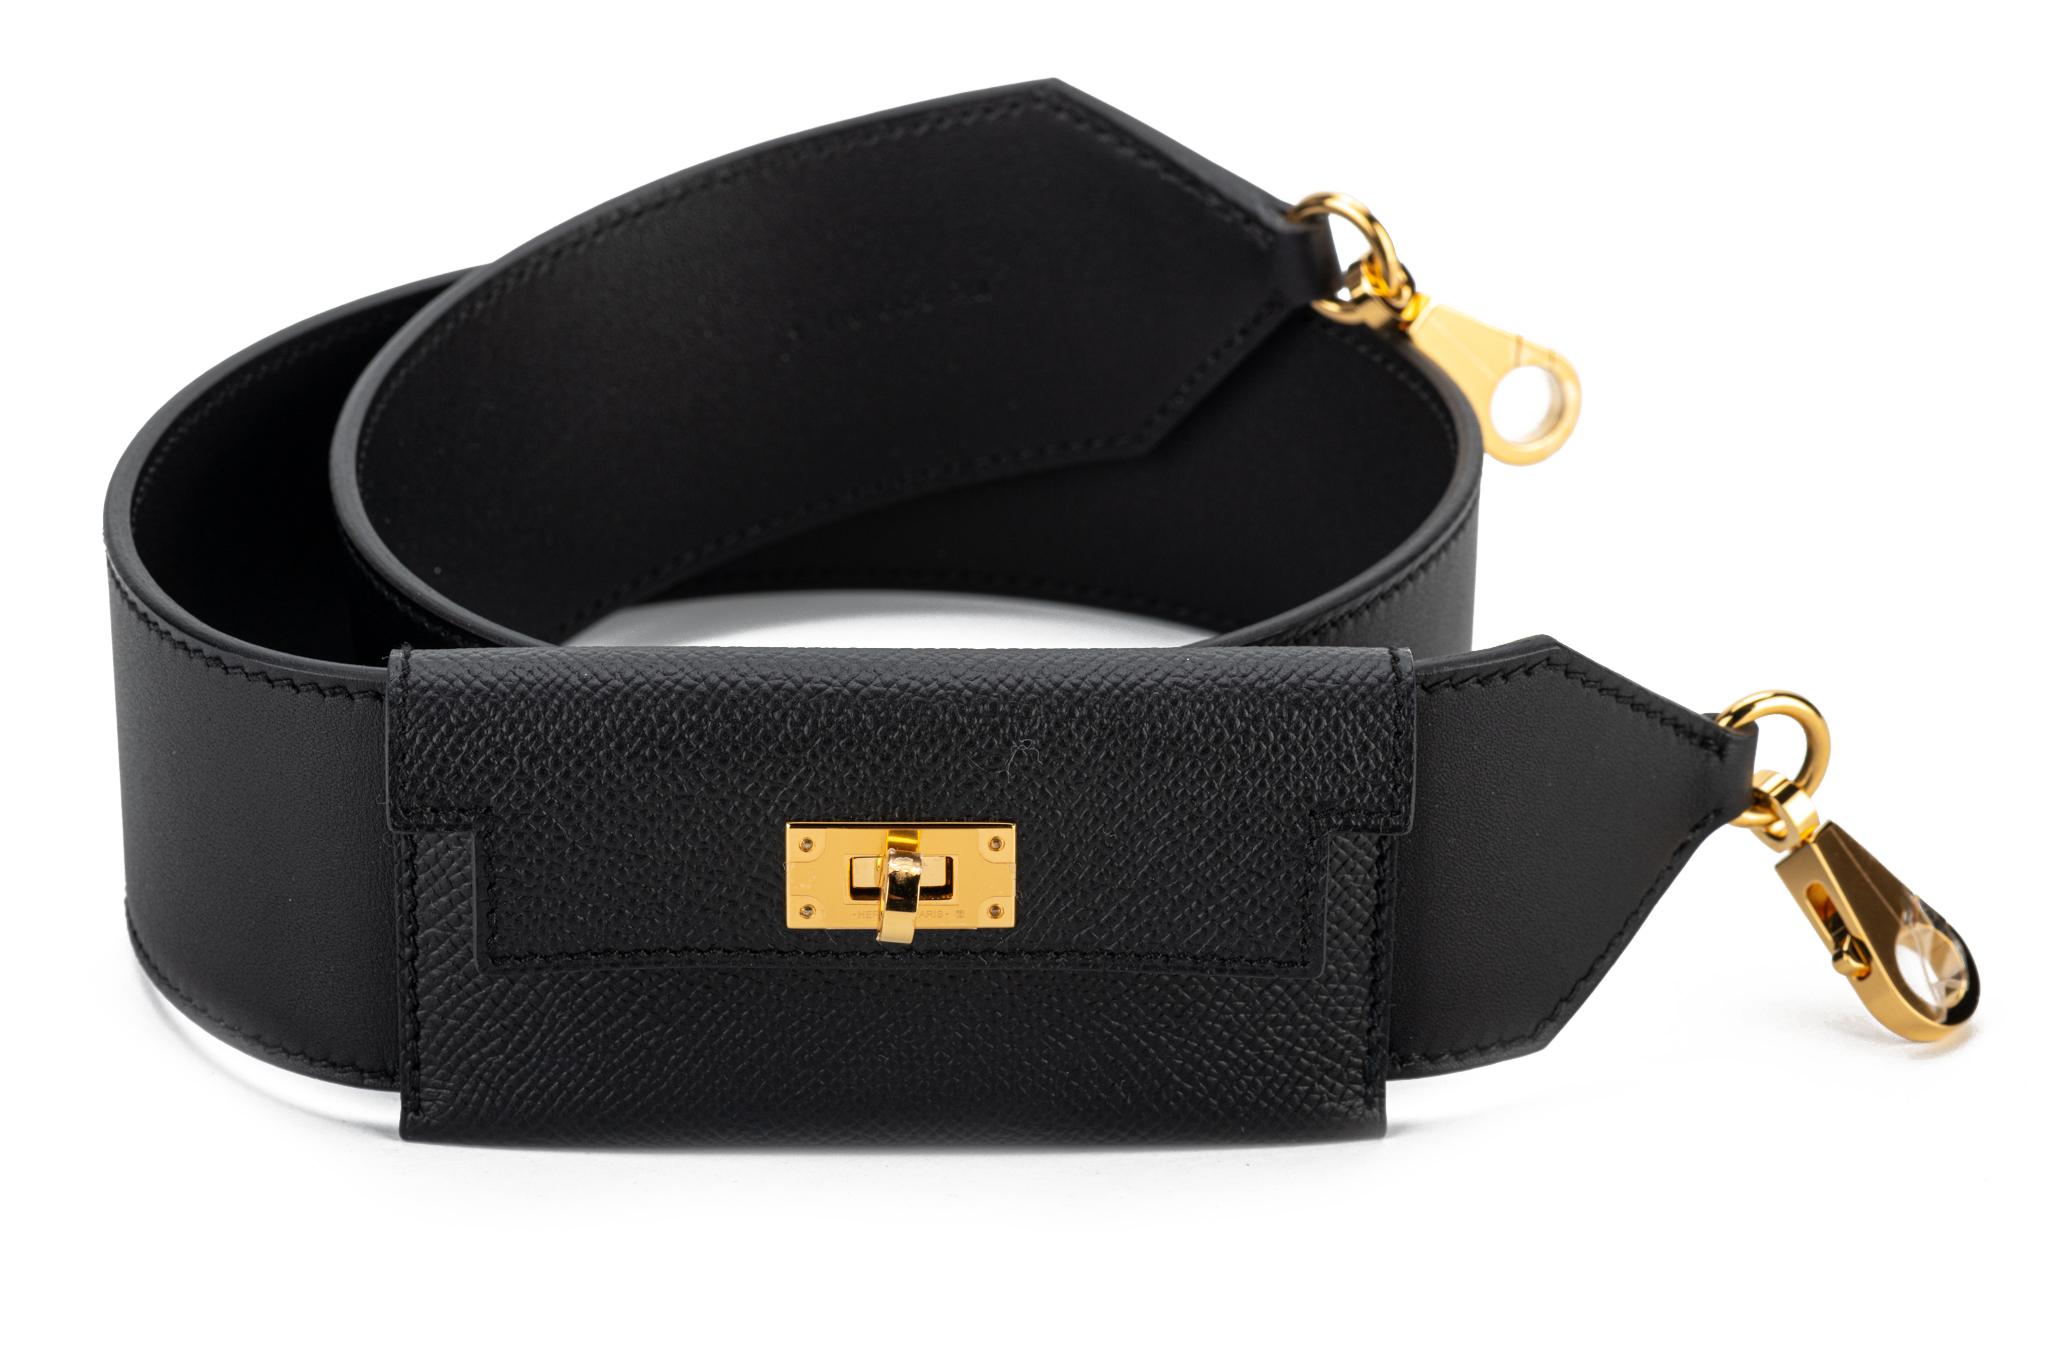 Hermès Kelly pochette bandouliere in black Epsom leather and goldtone hardware. New with original dust cover and box.